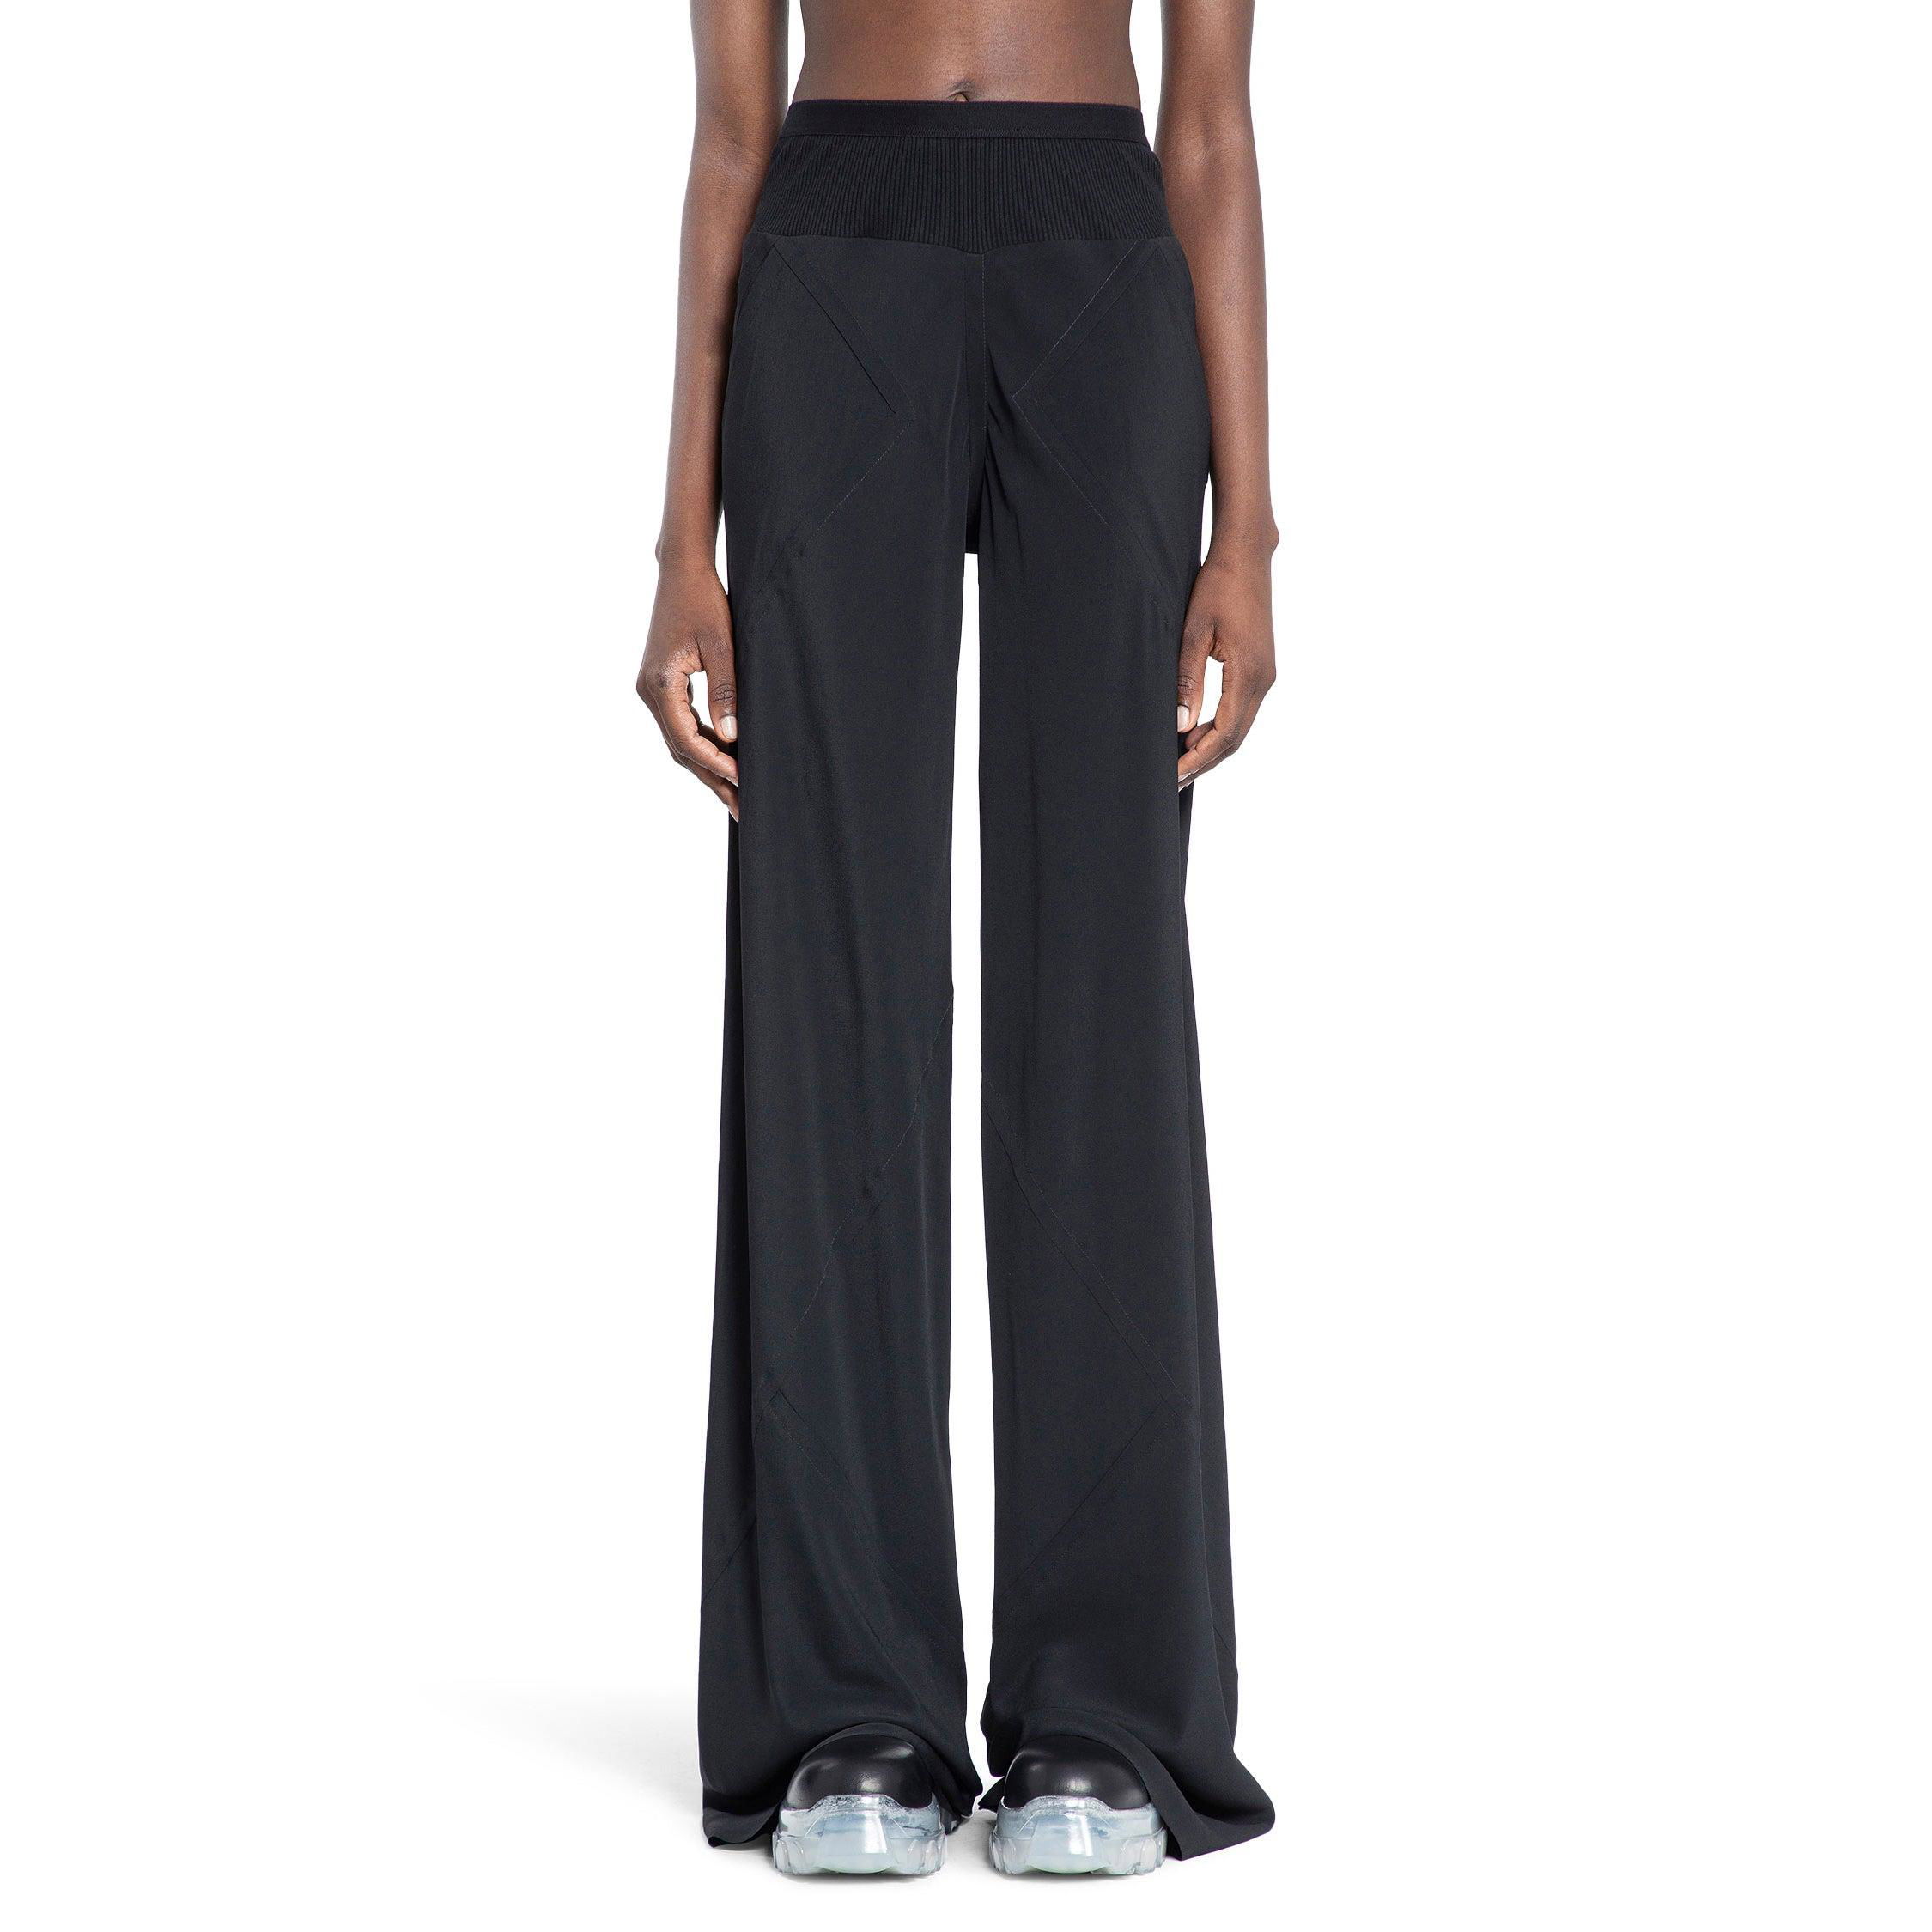 RICK OWENS WOMAN BLACK TROUSERS by RICK OWENS